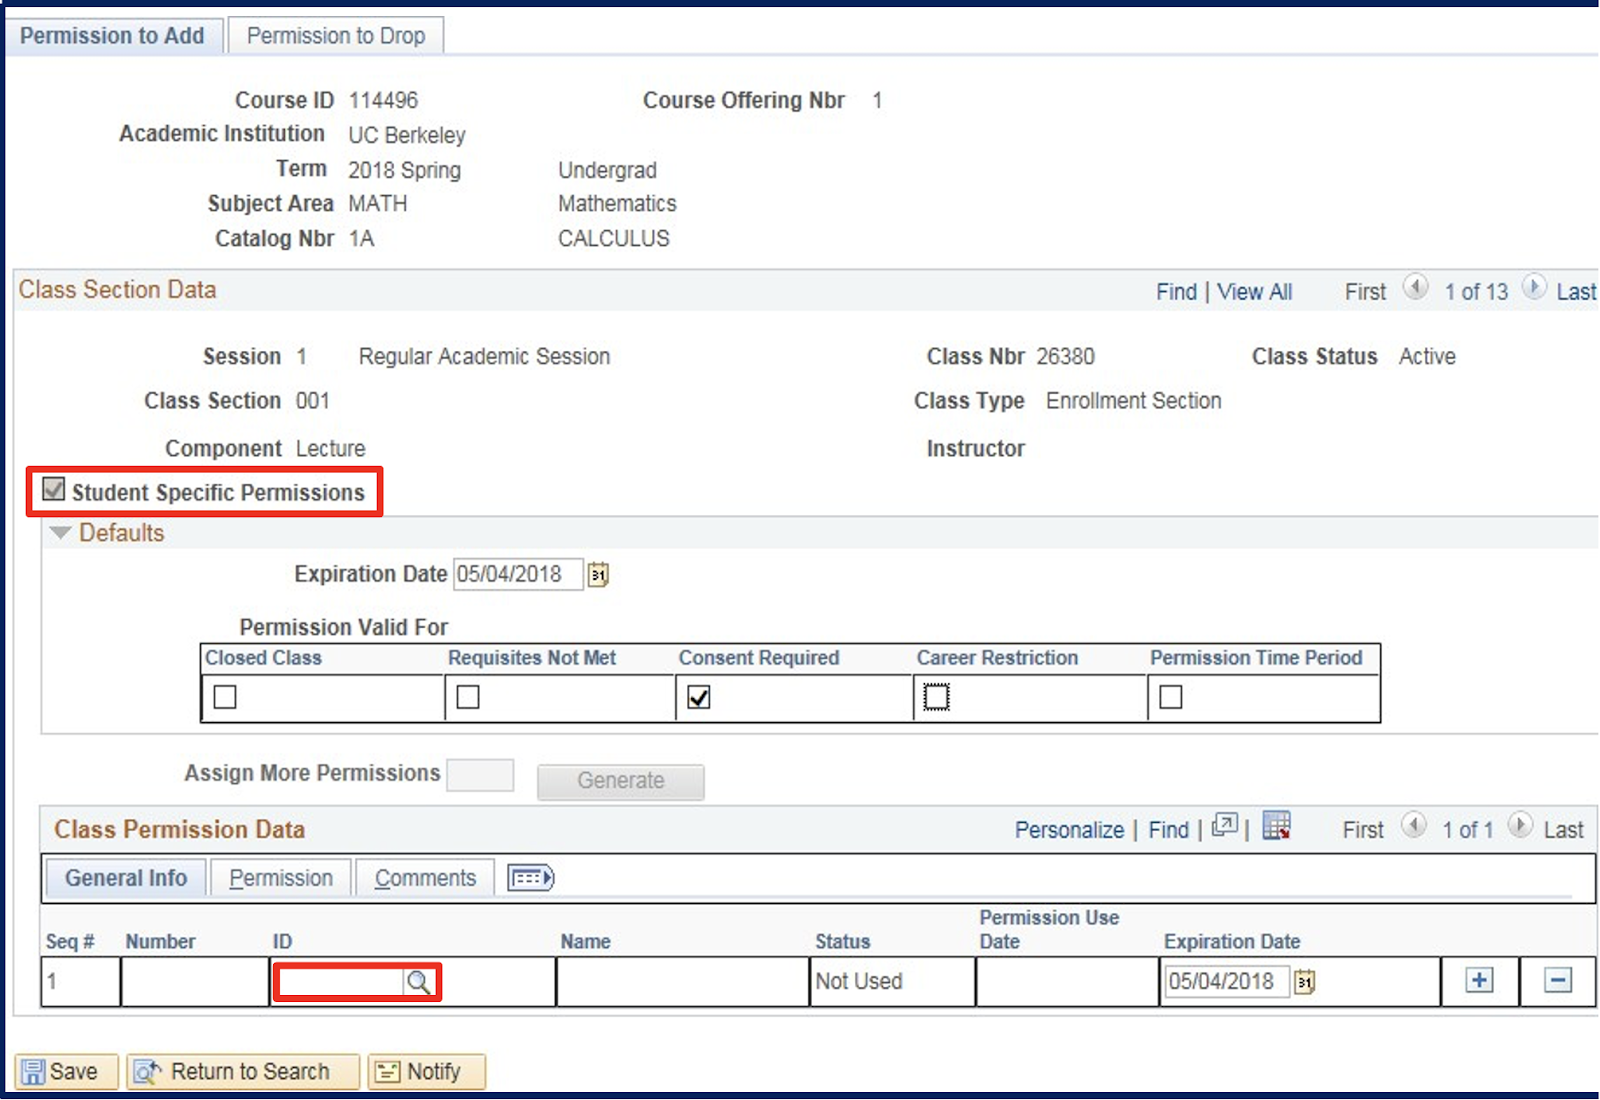 Enter Student ID numbers in the Class Permission Data section